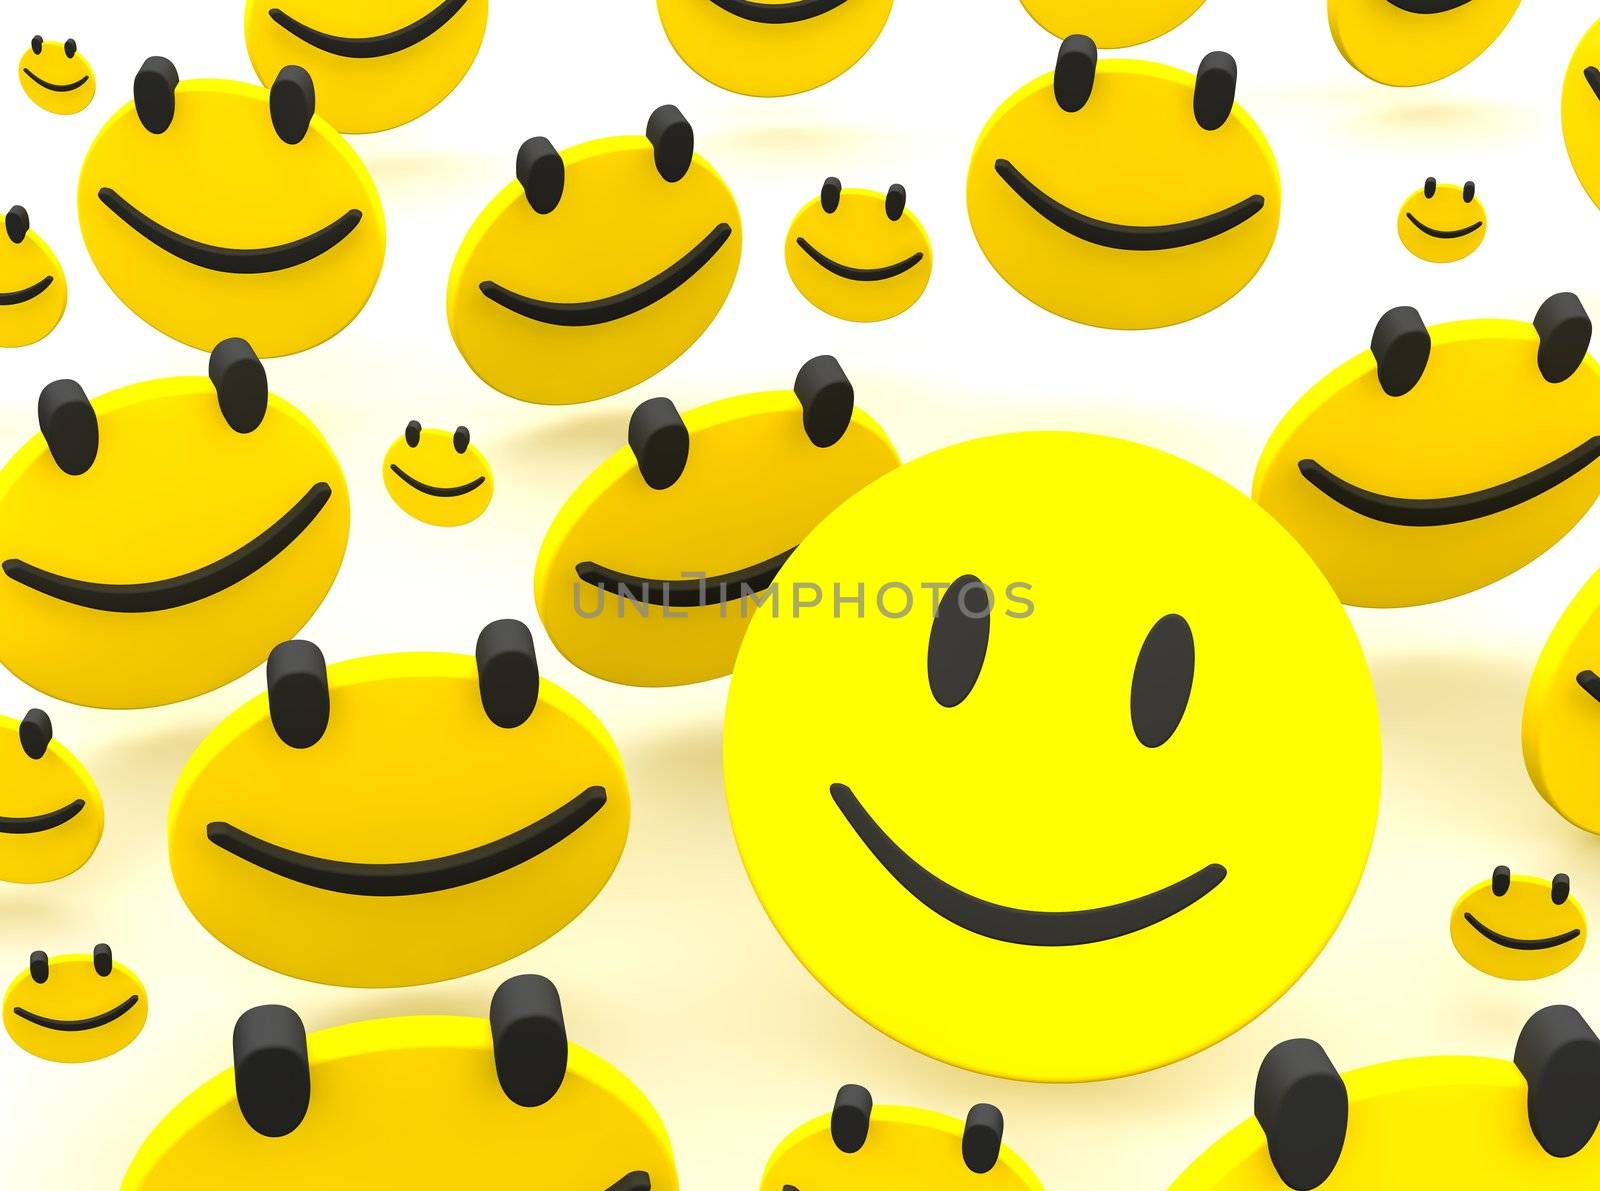 Group of smileys by skvoor